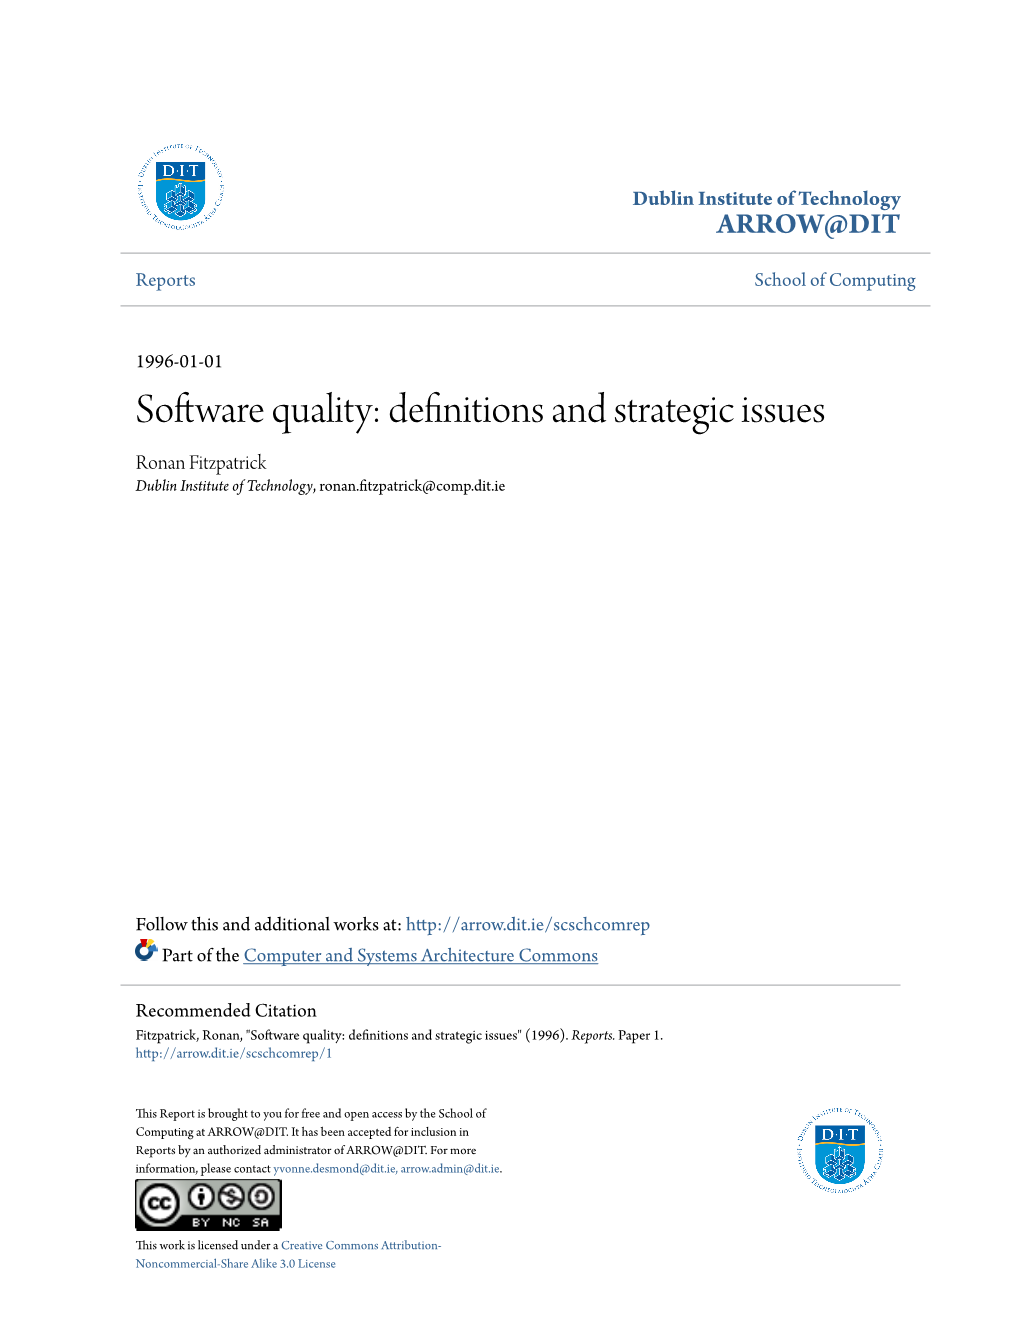 Software Quality: Definitions and Strategic Issues Ronan Fitzpatrick Dublin Institute of Technology, Ronan.Fitzpatrick@Comp.Dit.Ie